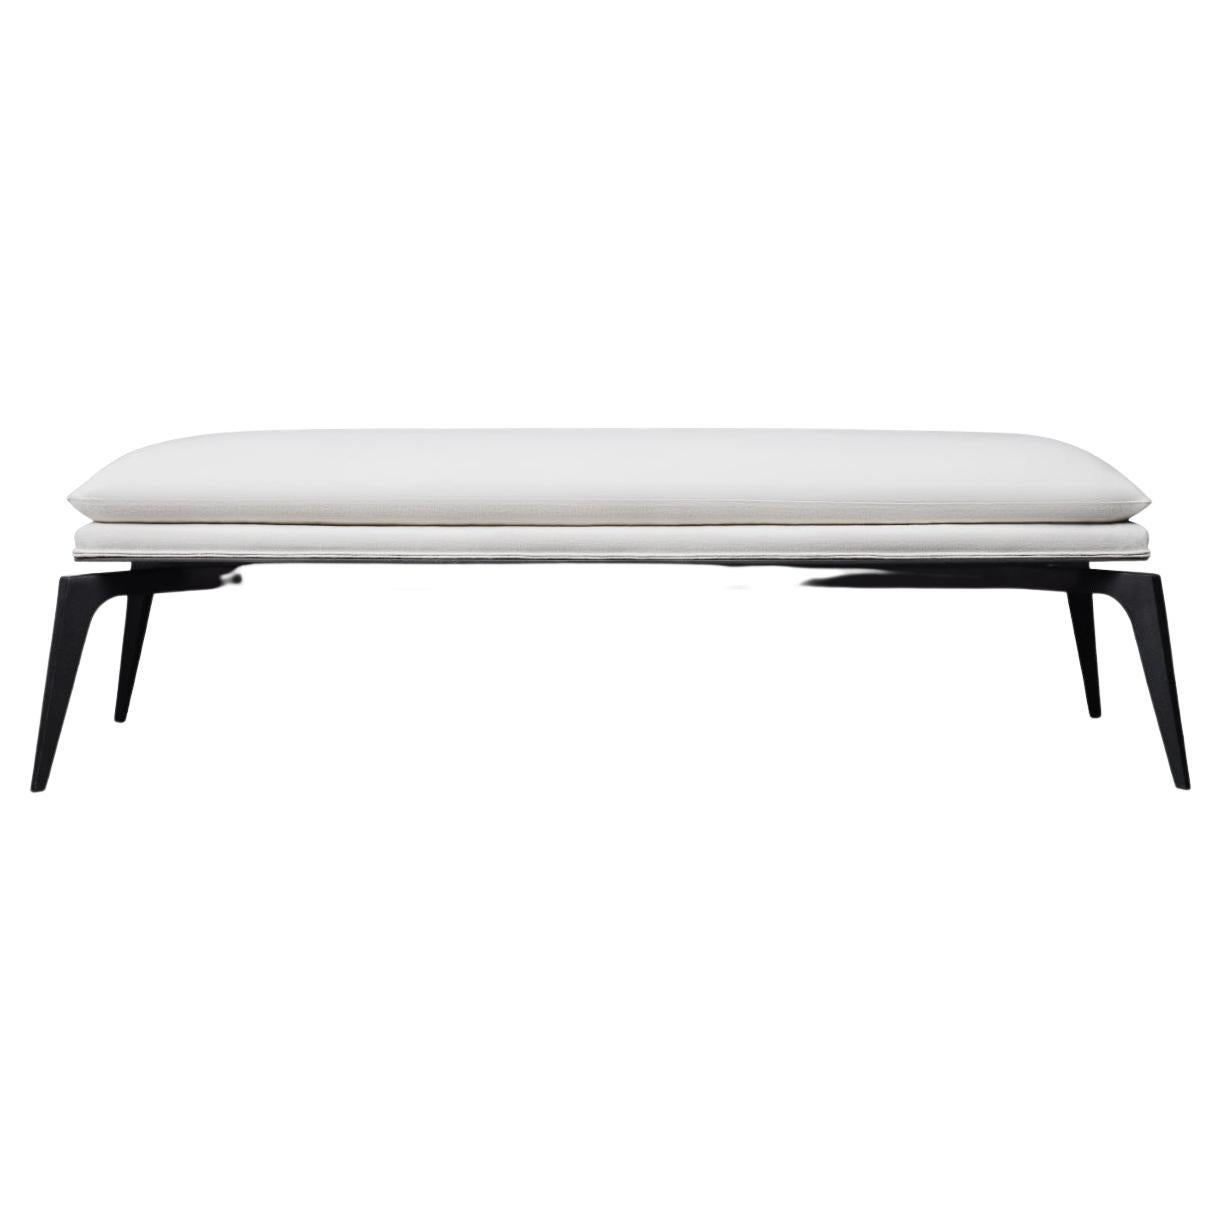 Metal Arsizio Bench with Upholstered Seat